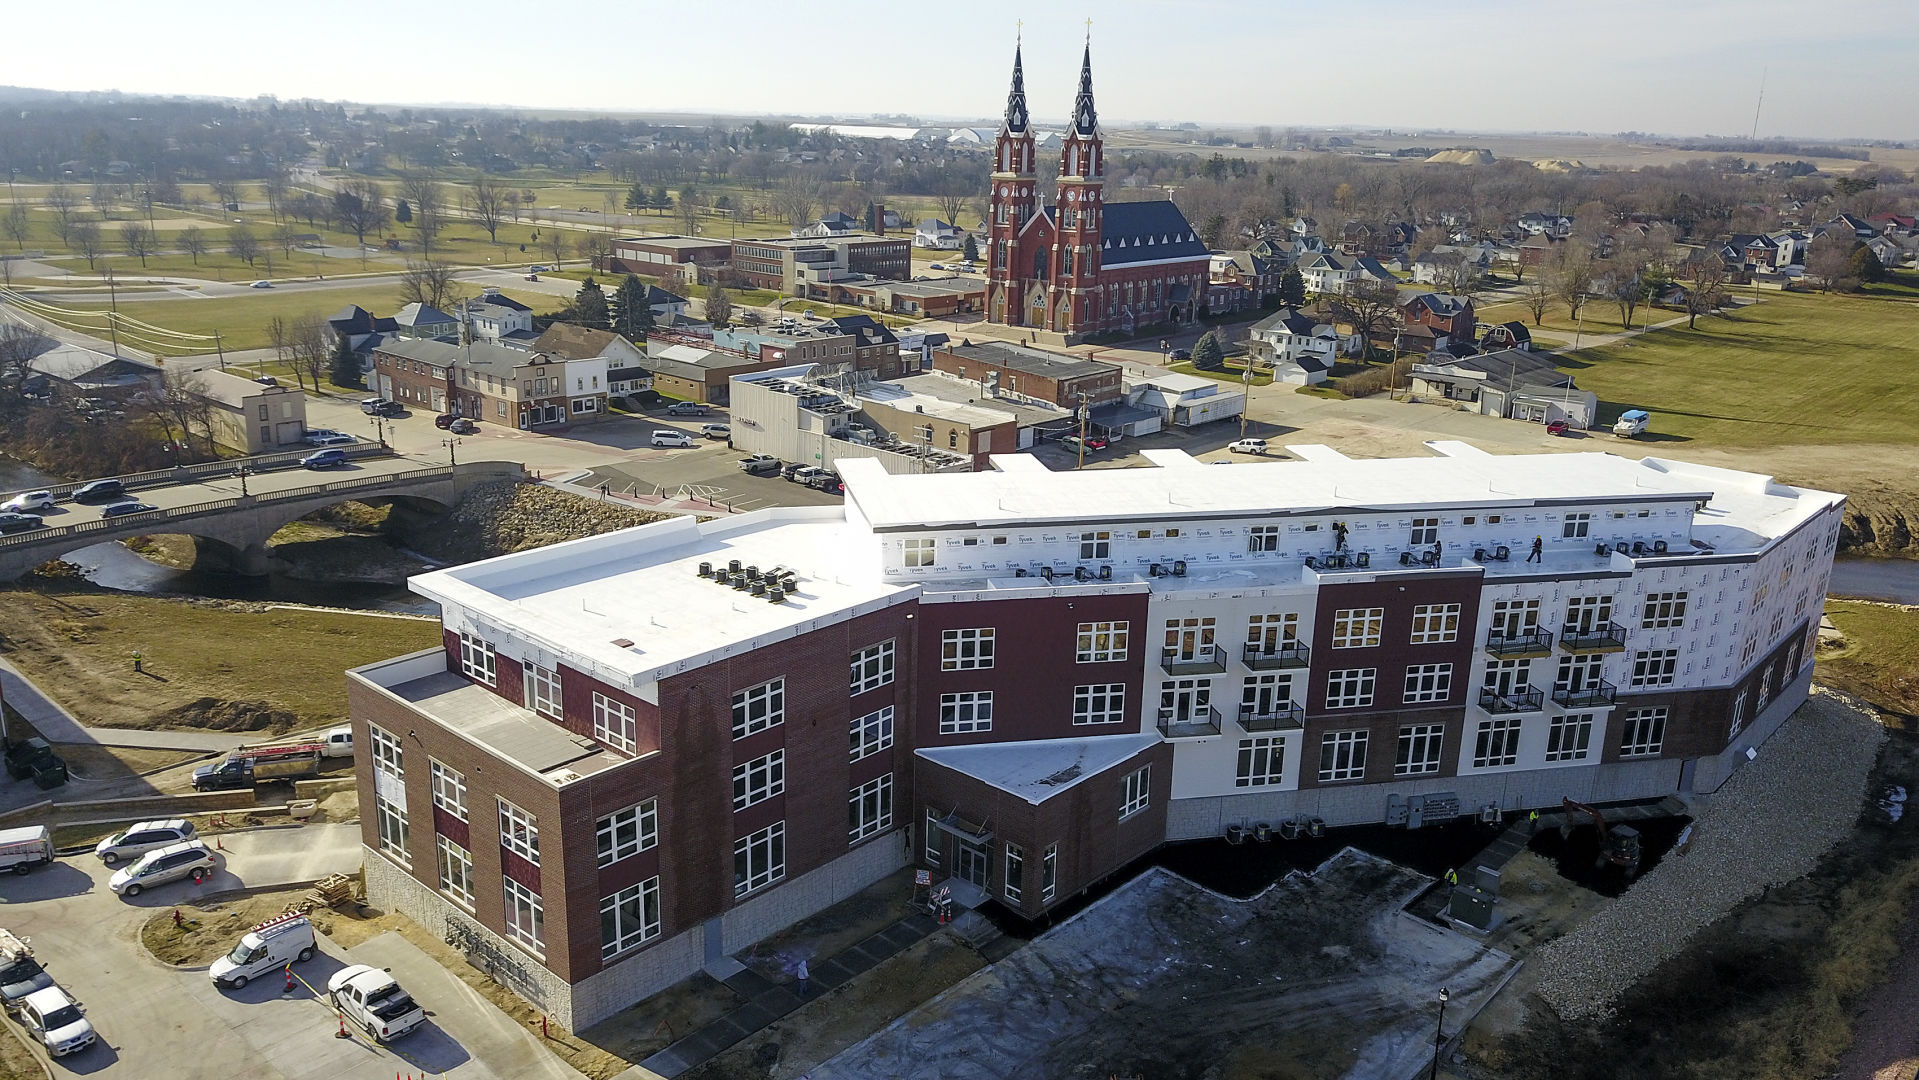 The Landing in Dyersville, Iowa, will offer commercial space, along with condos and loft apartments on the upper levels. PHOTO CREDIT: Dave Kettering